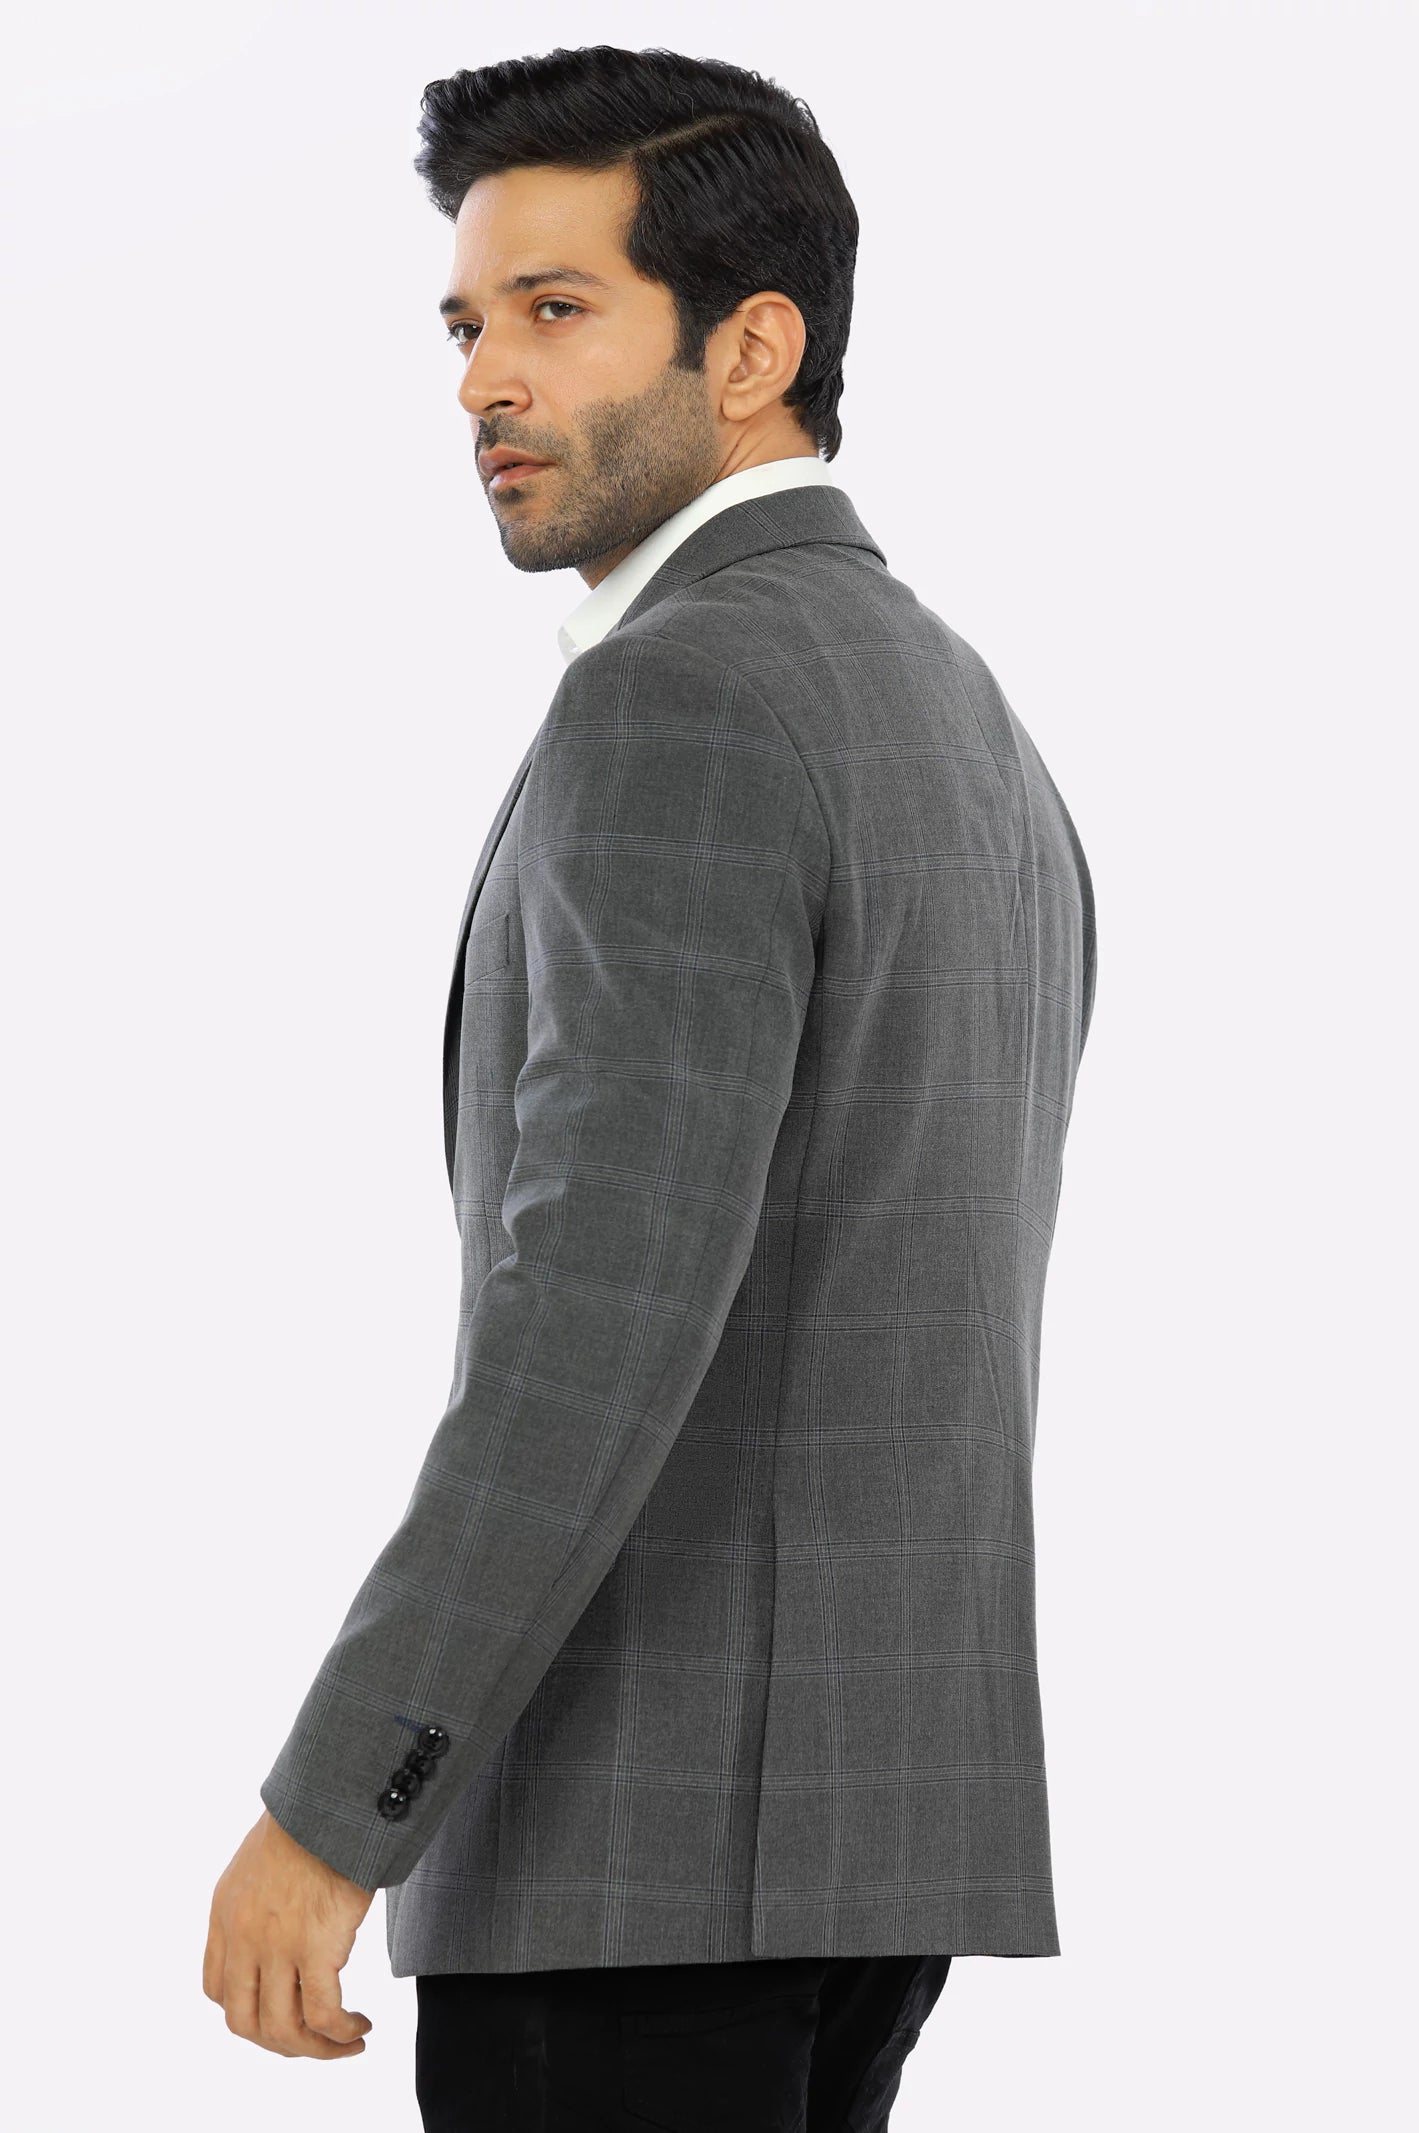 Coffee Brown Blazer for Men's From Diners